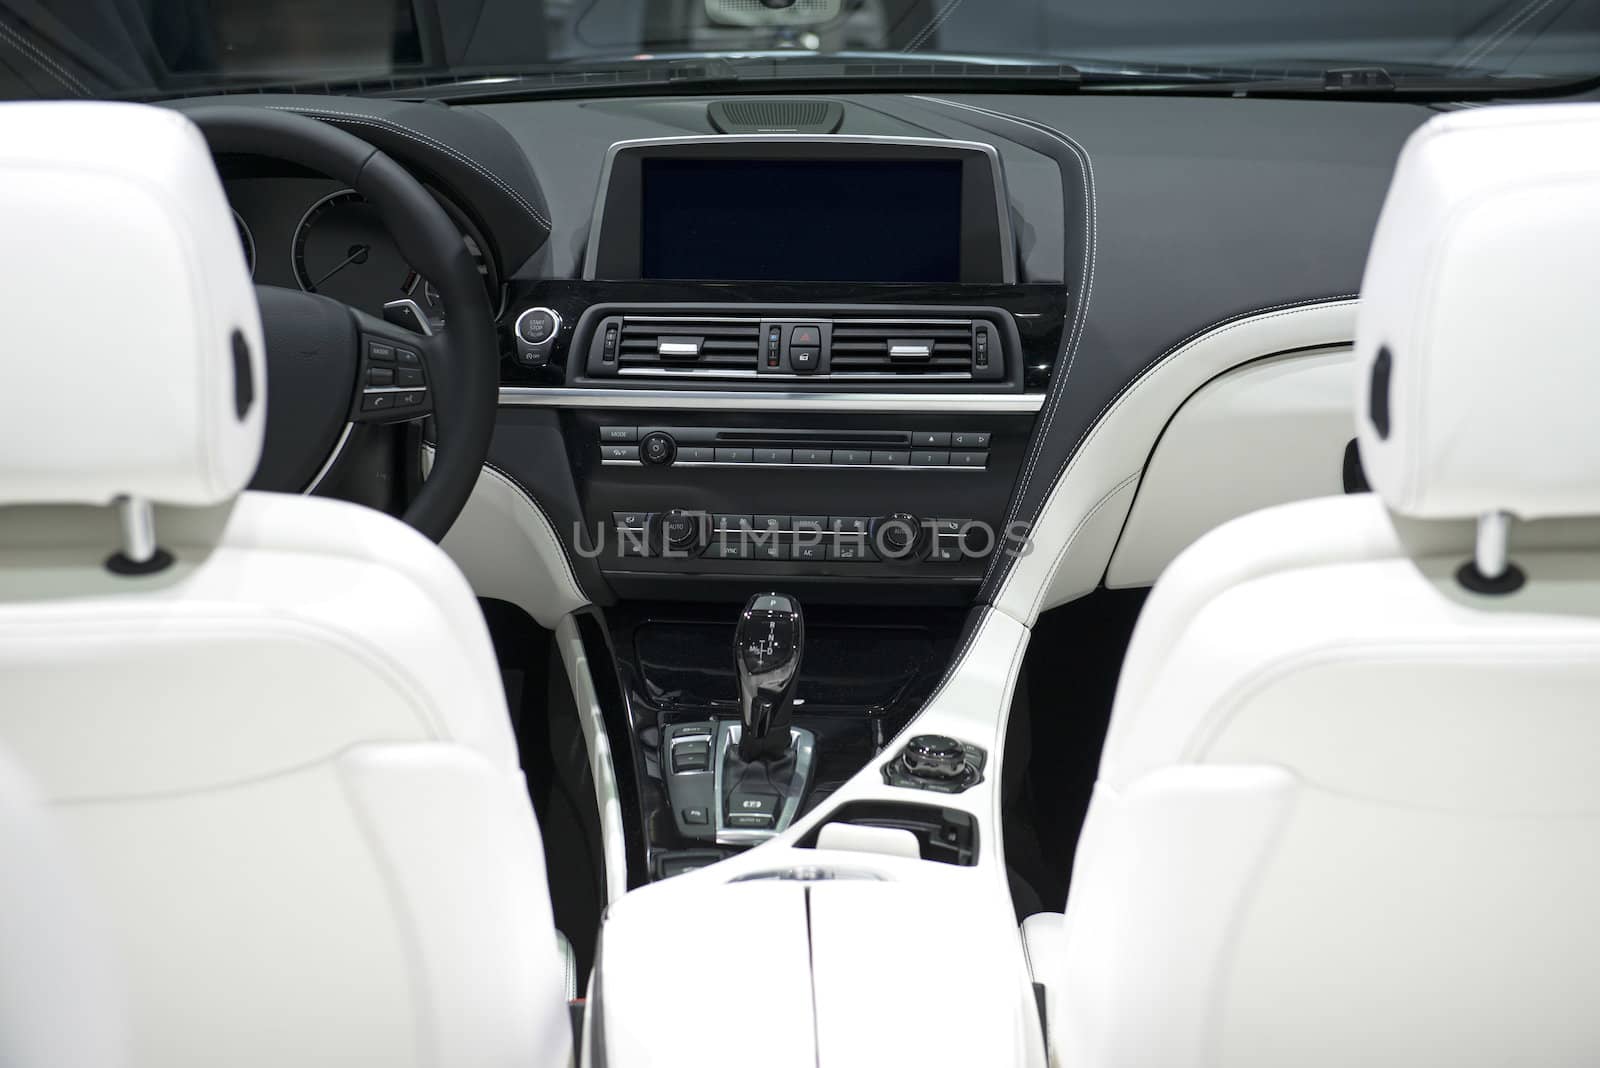 Car Dashboard With White Leather Seats by Rainman